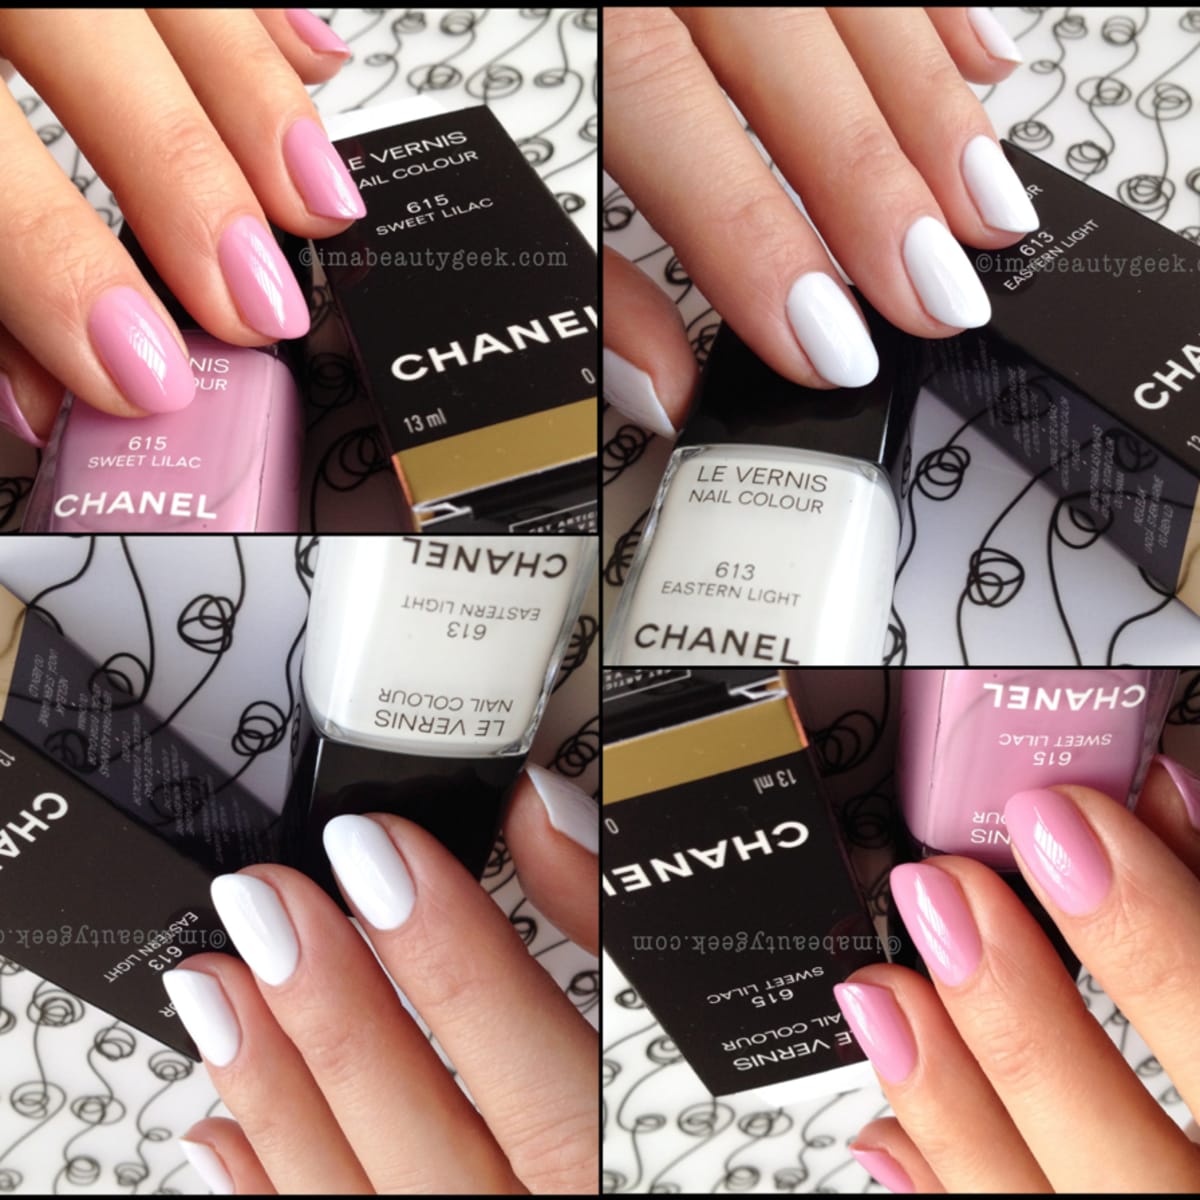 Chanel Le Vernis Swatches | Nail polish, Chanel nails, Lip swatches